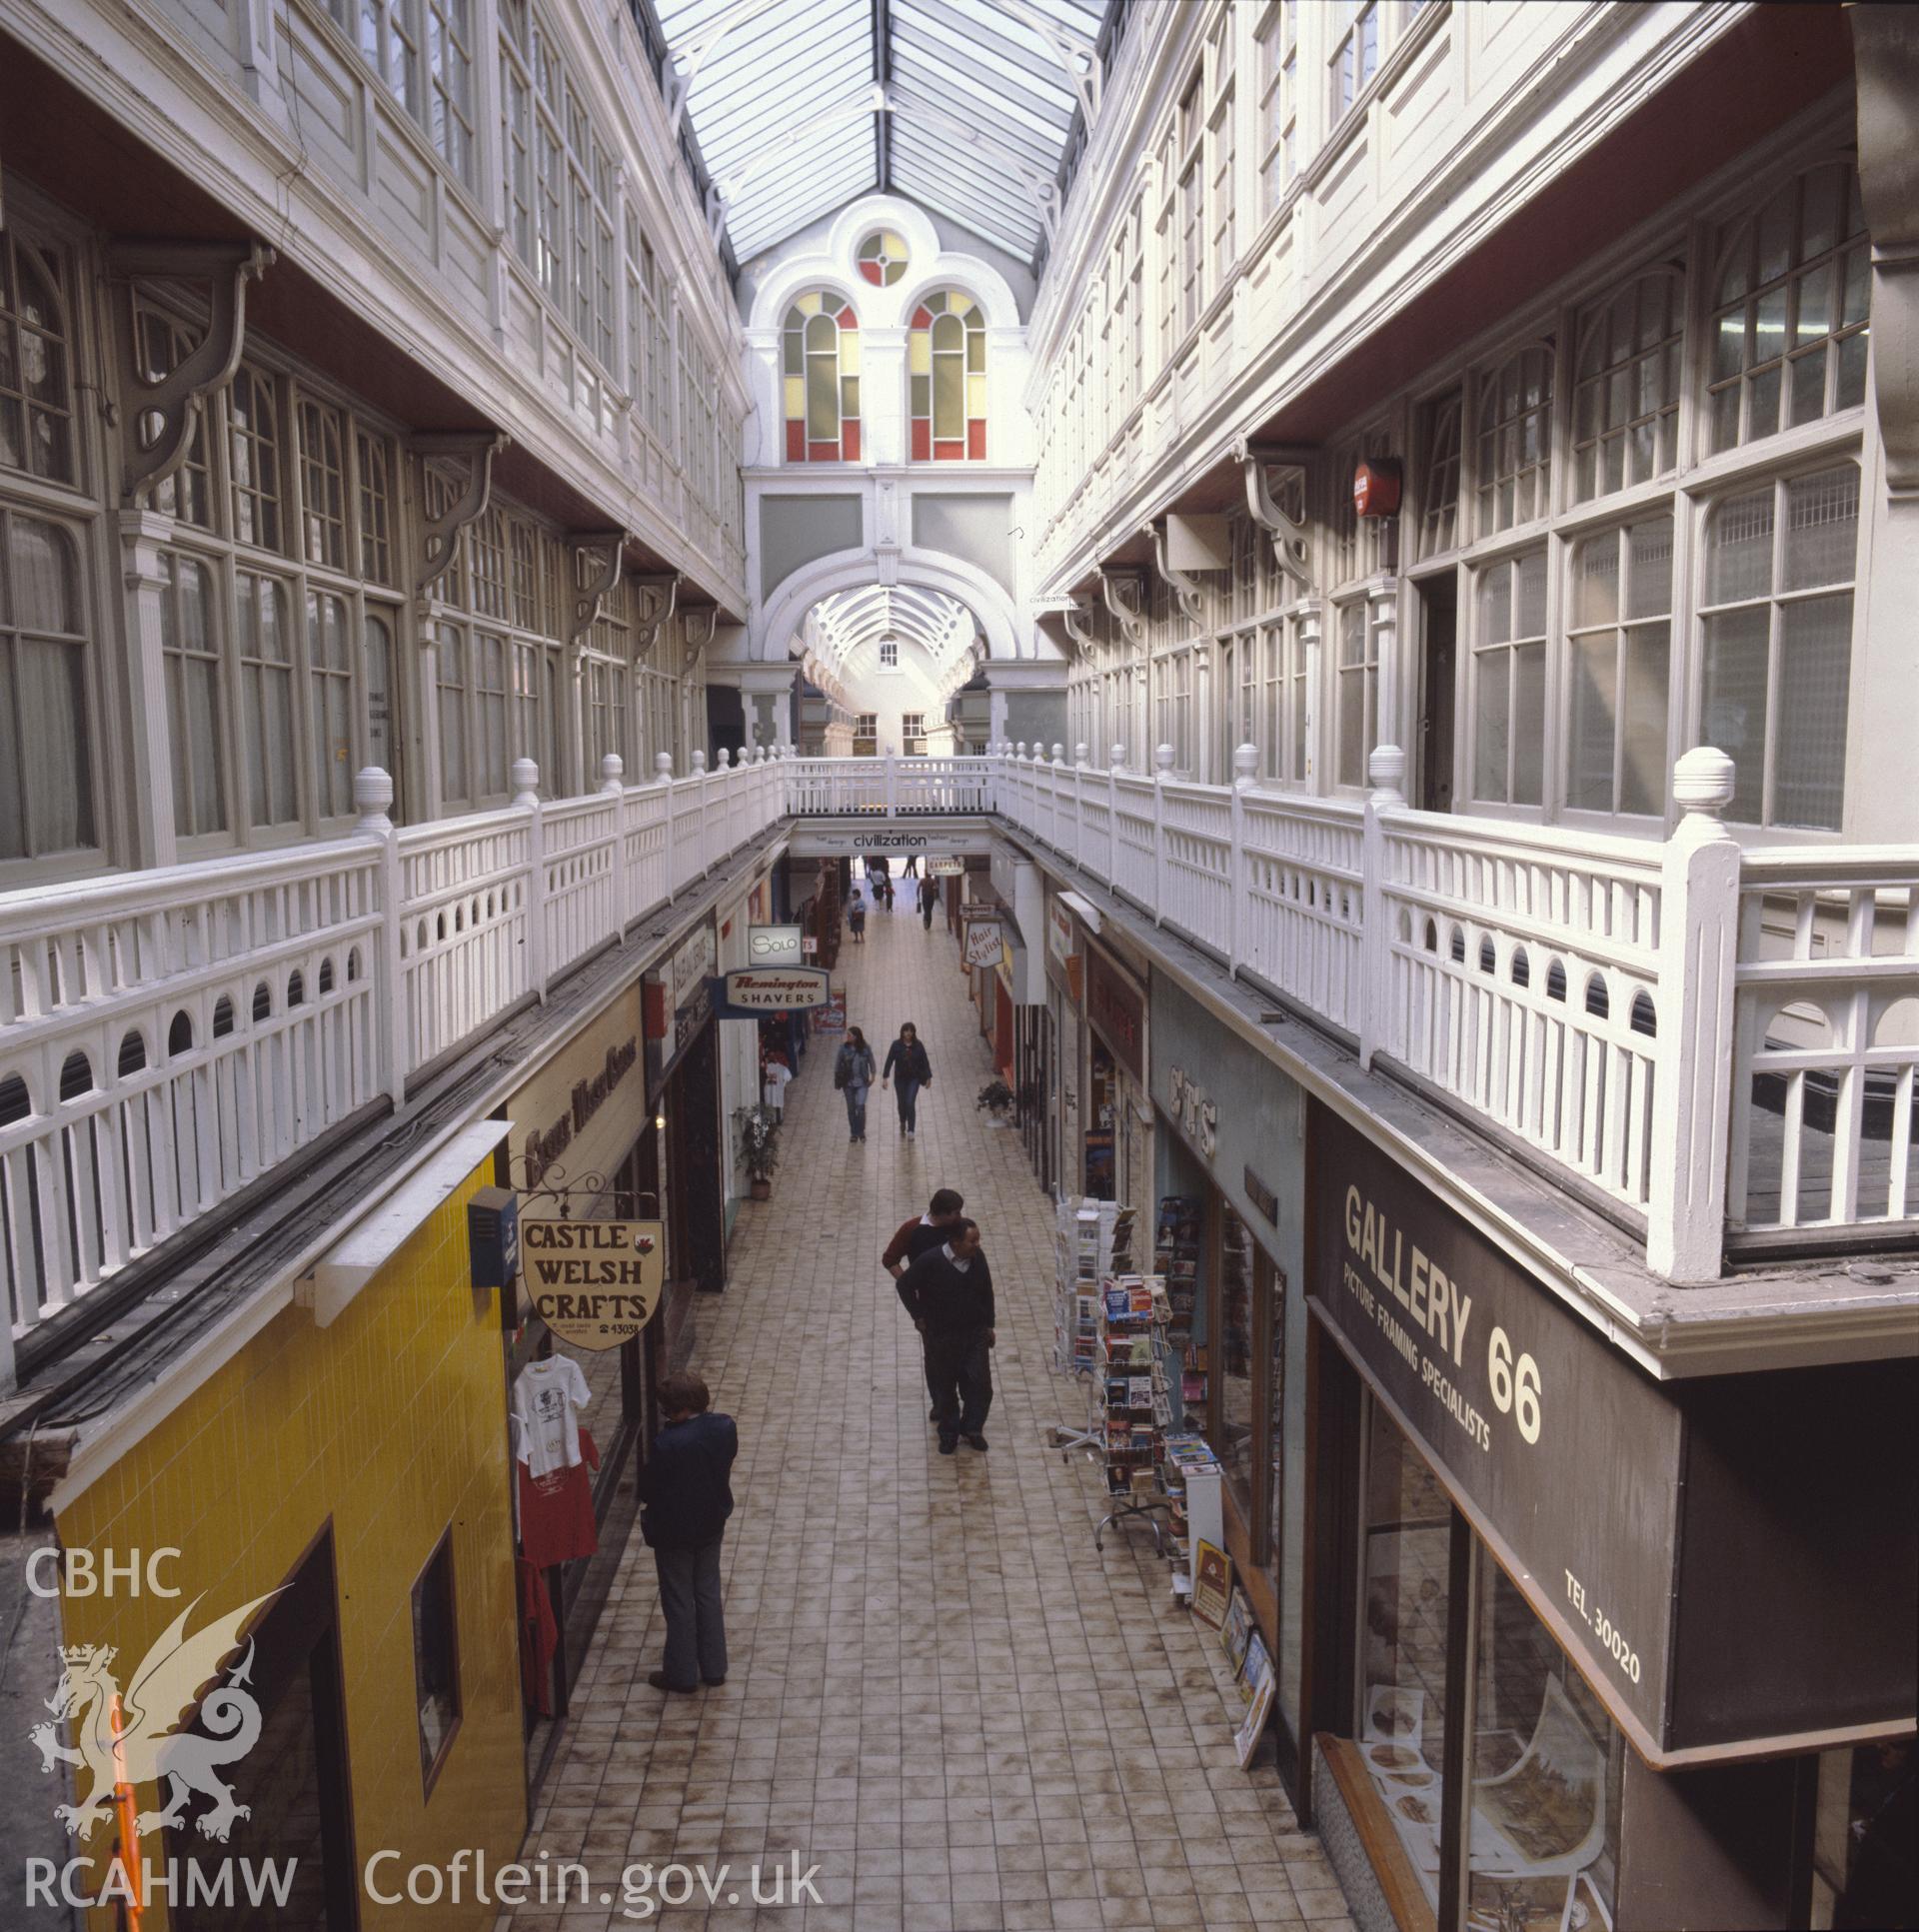 1 colour transparency showing view of Castle Arcade in Cardiff with shoppers; collated by the former Central Office of Information.